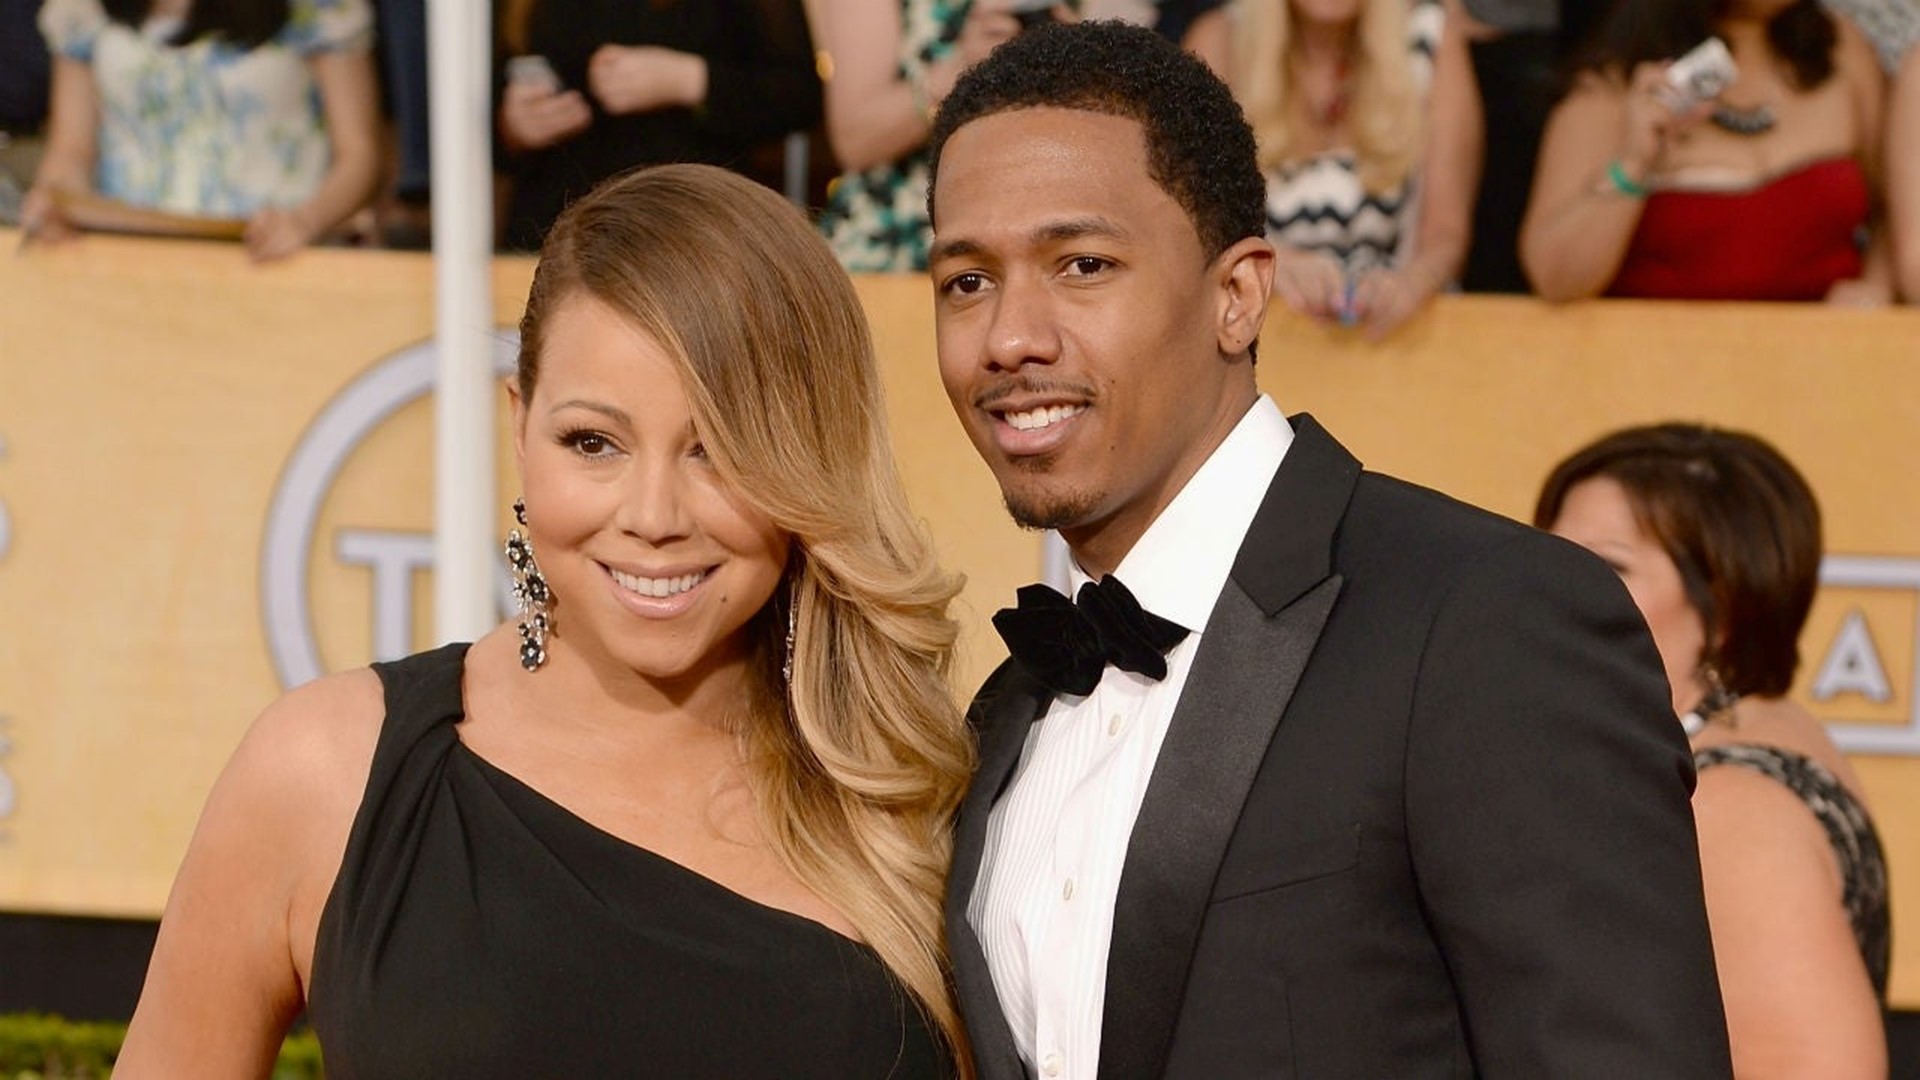 Nick Cannon Reflects on His Marriage to Mariah Carey, Calls Her 'One of